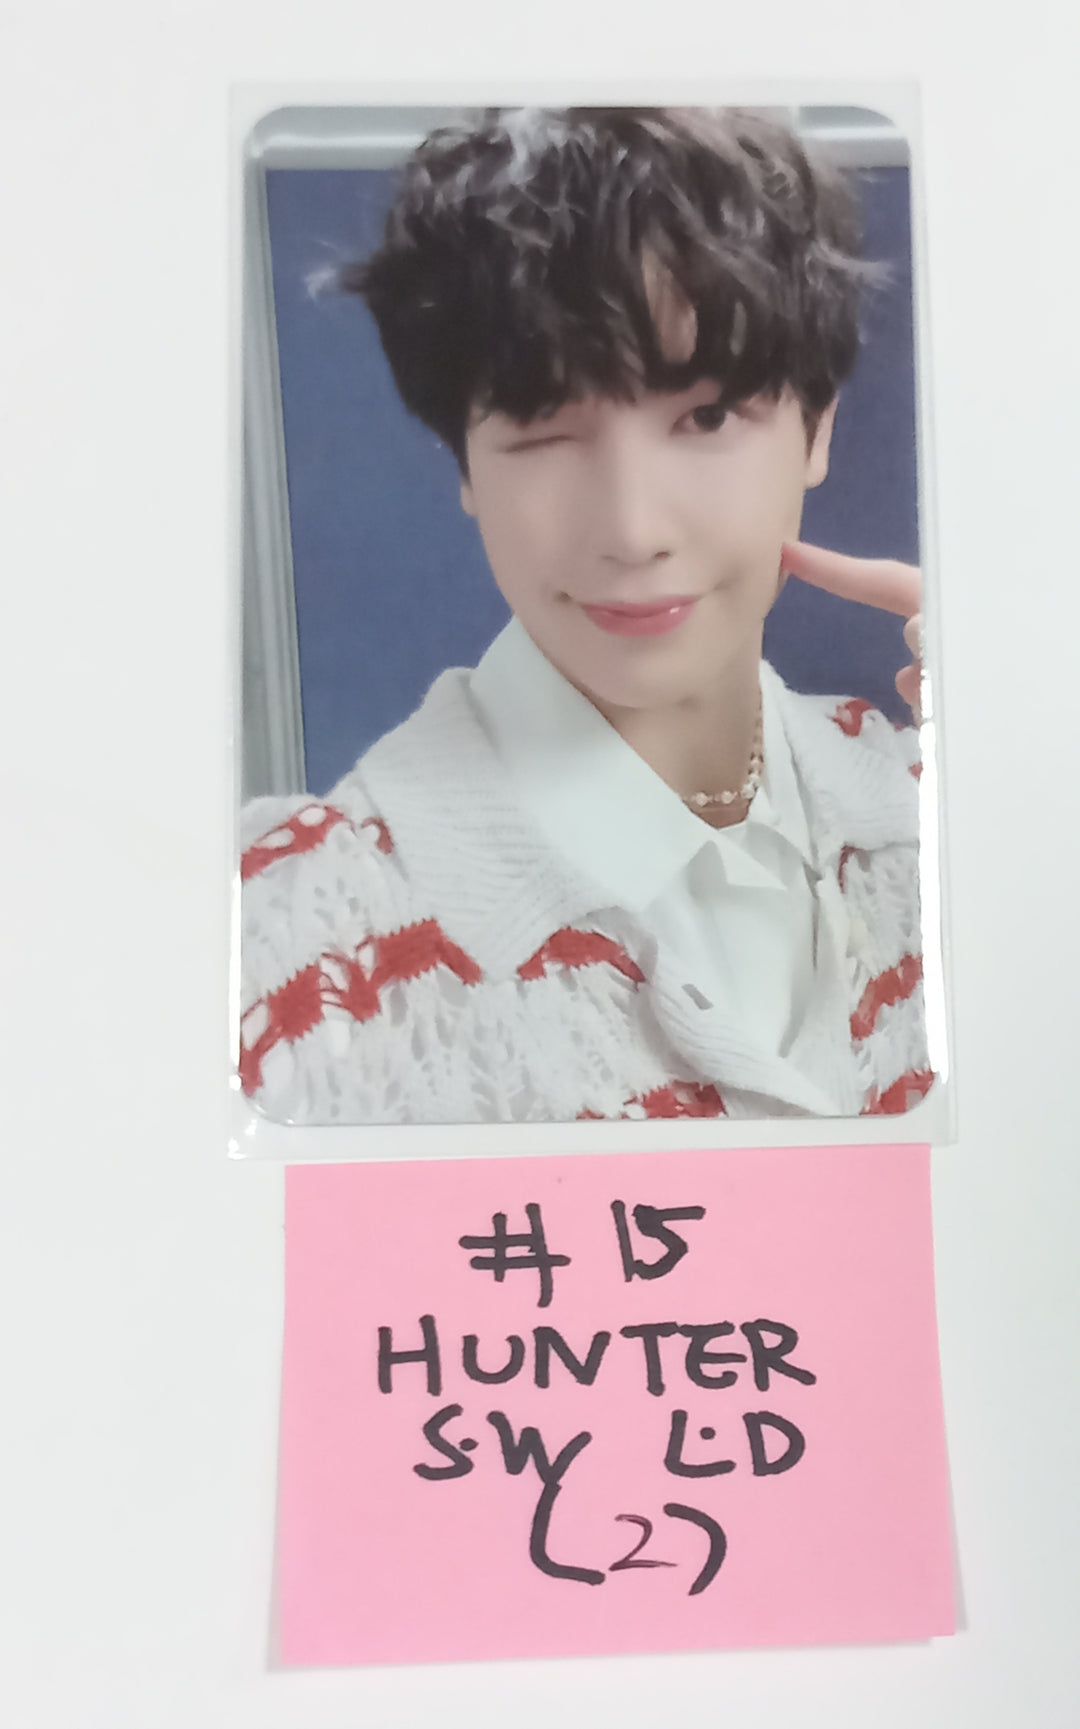 Xikers "Homeboy" - Soundwave Lcuky Draw Event Photocard Round 3 [23.09.07]